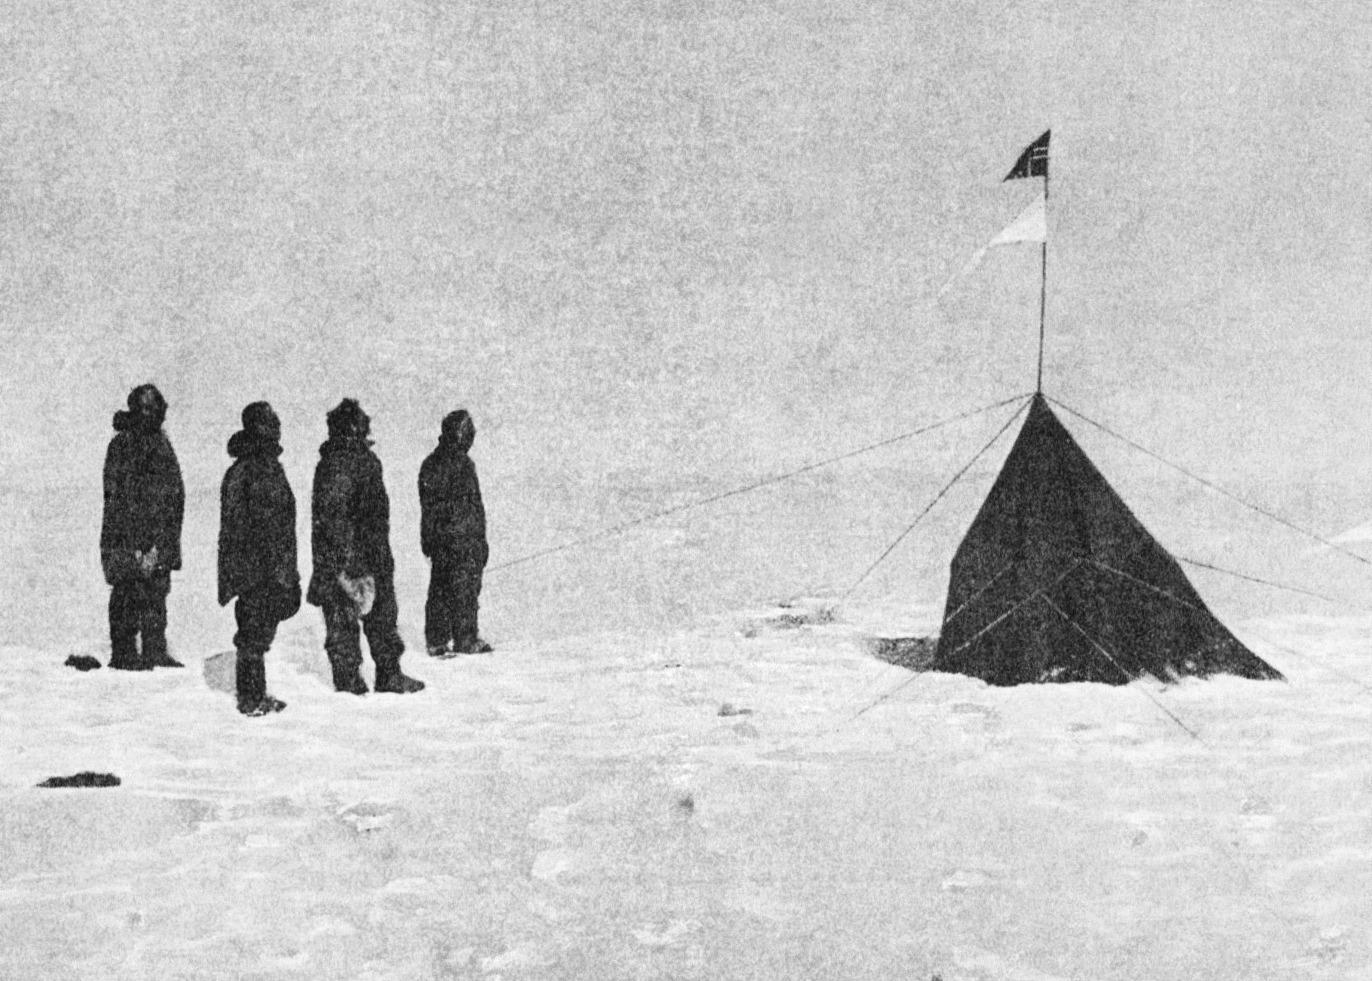 Amundsen's expedition at the South Pole (courtesy of Wiki Commons)